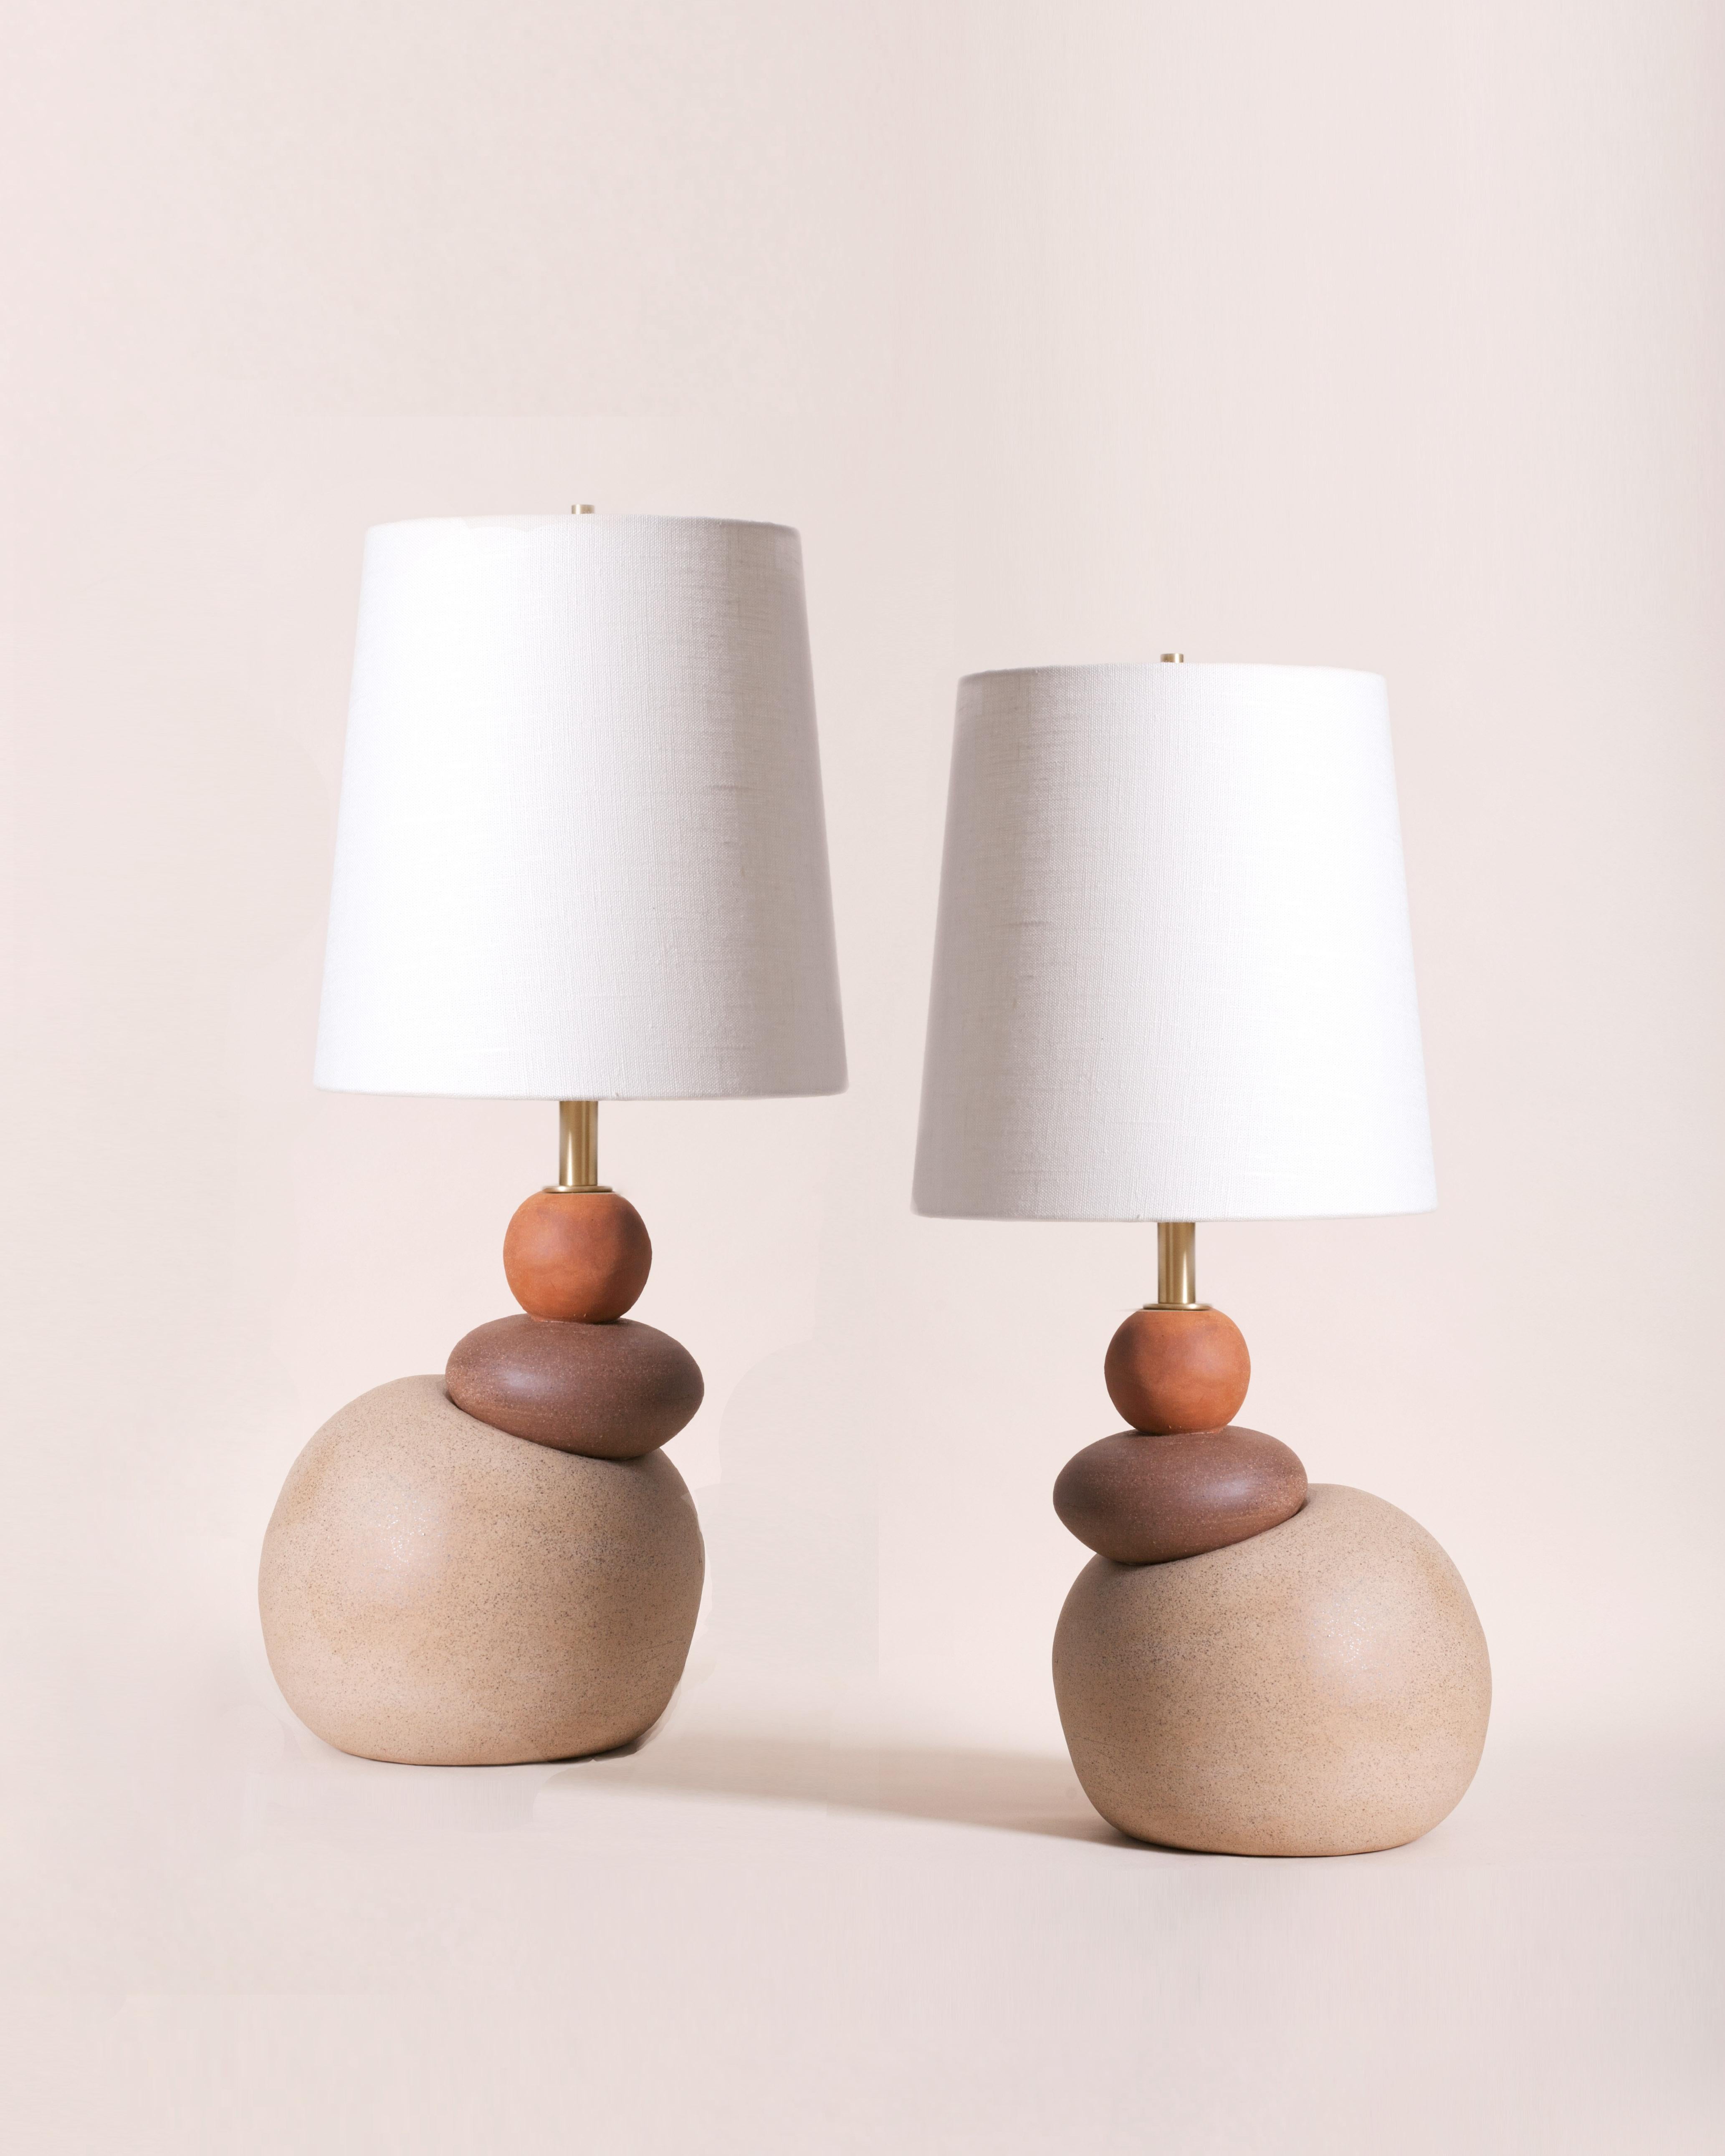 One of a kind ceramic lamps, thrown on the potters wheel and assembled by hand. The lamp base is comprised of three different clay bodies and features a raw, unglazed ceramic surface to highlight the texture of natural clay. These pieces were